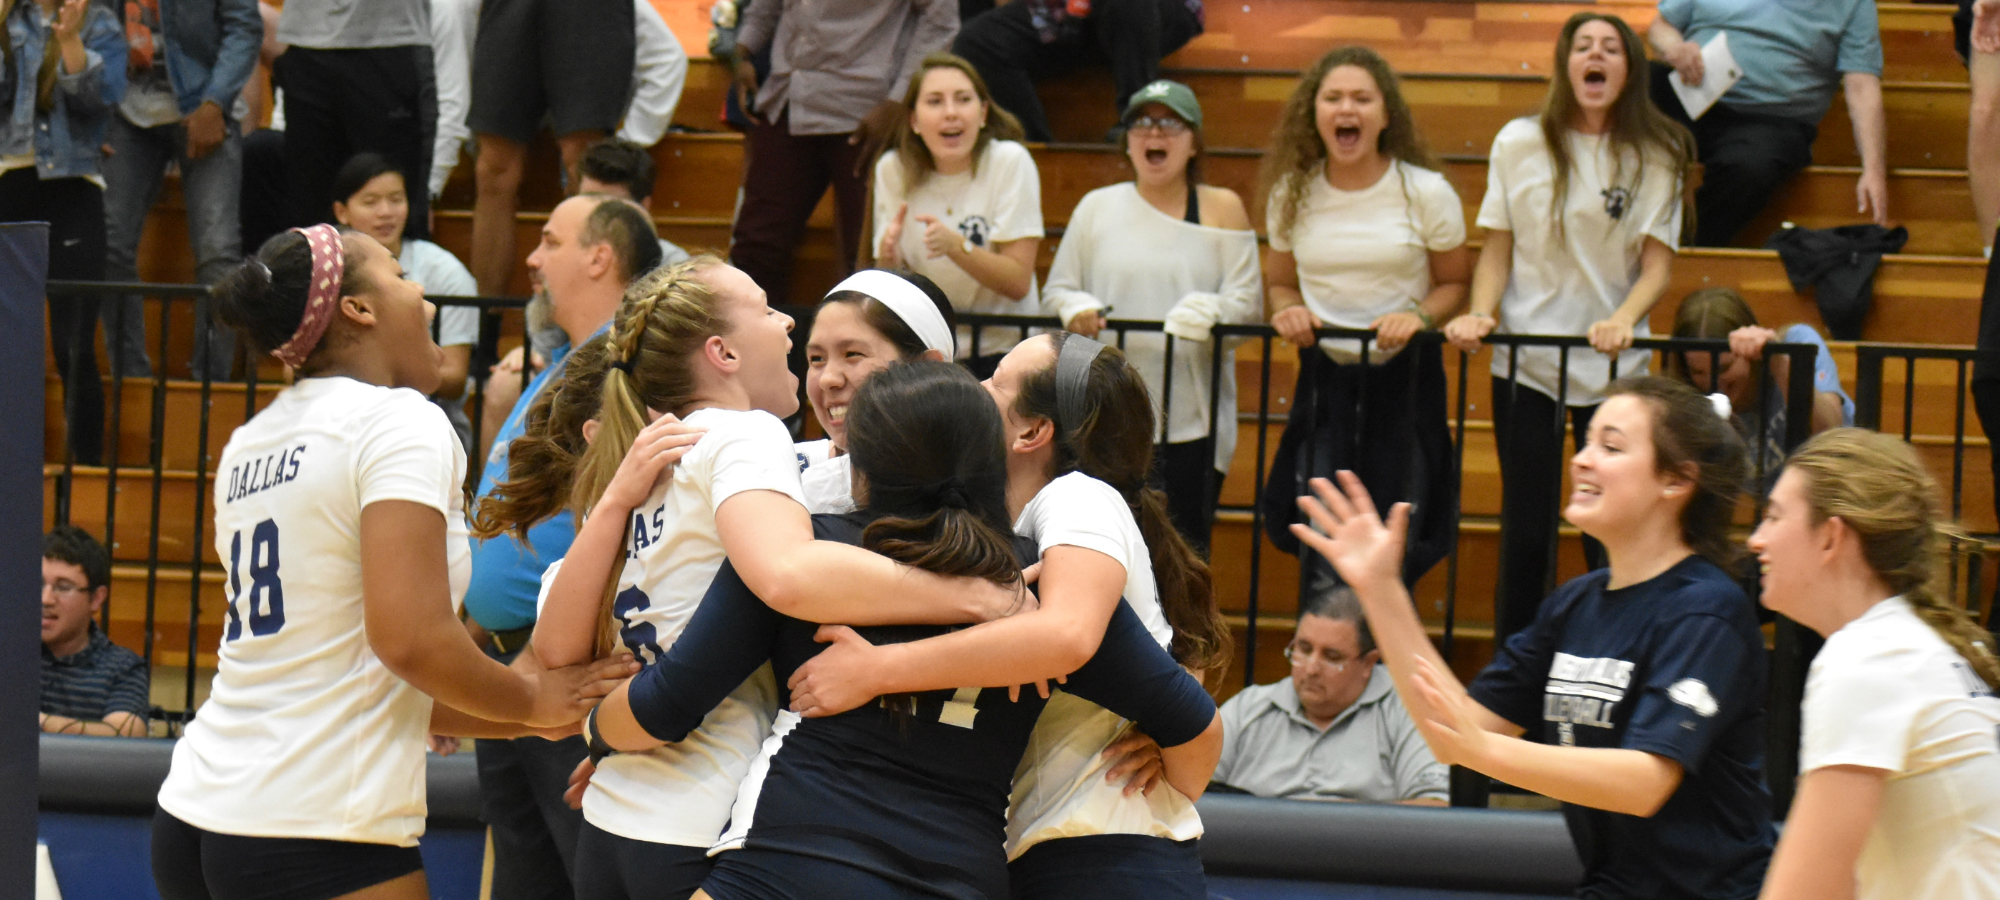 Crusaders advance to SCAC Tournament Semifinals after five-set thriller.